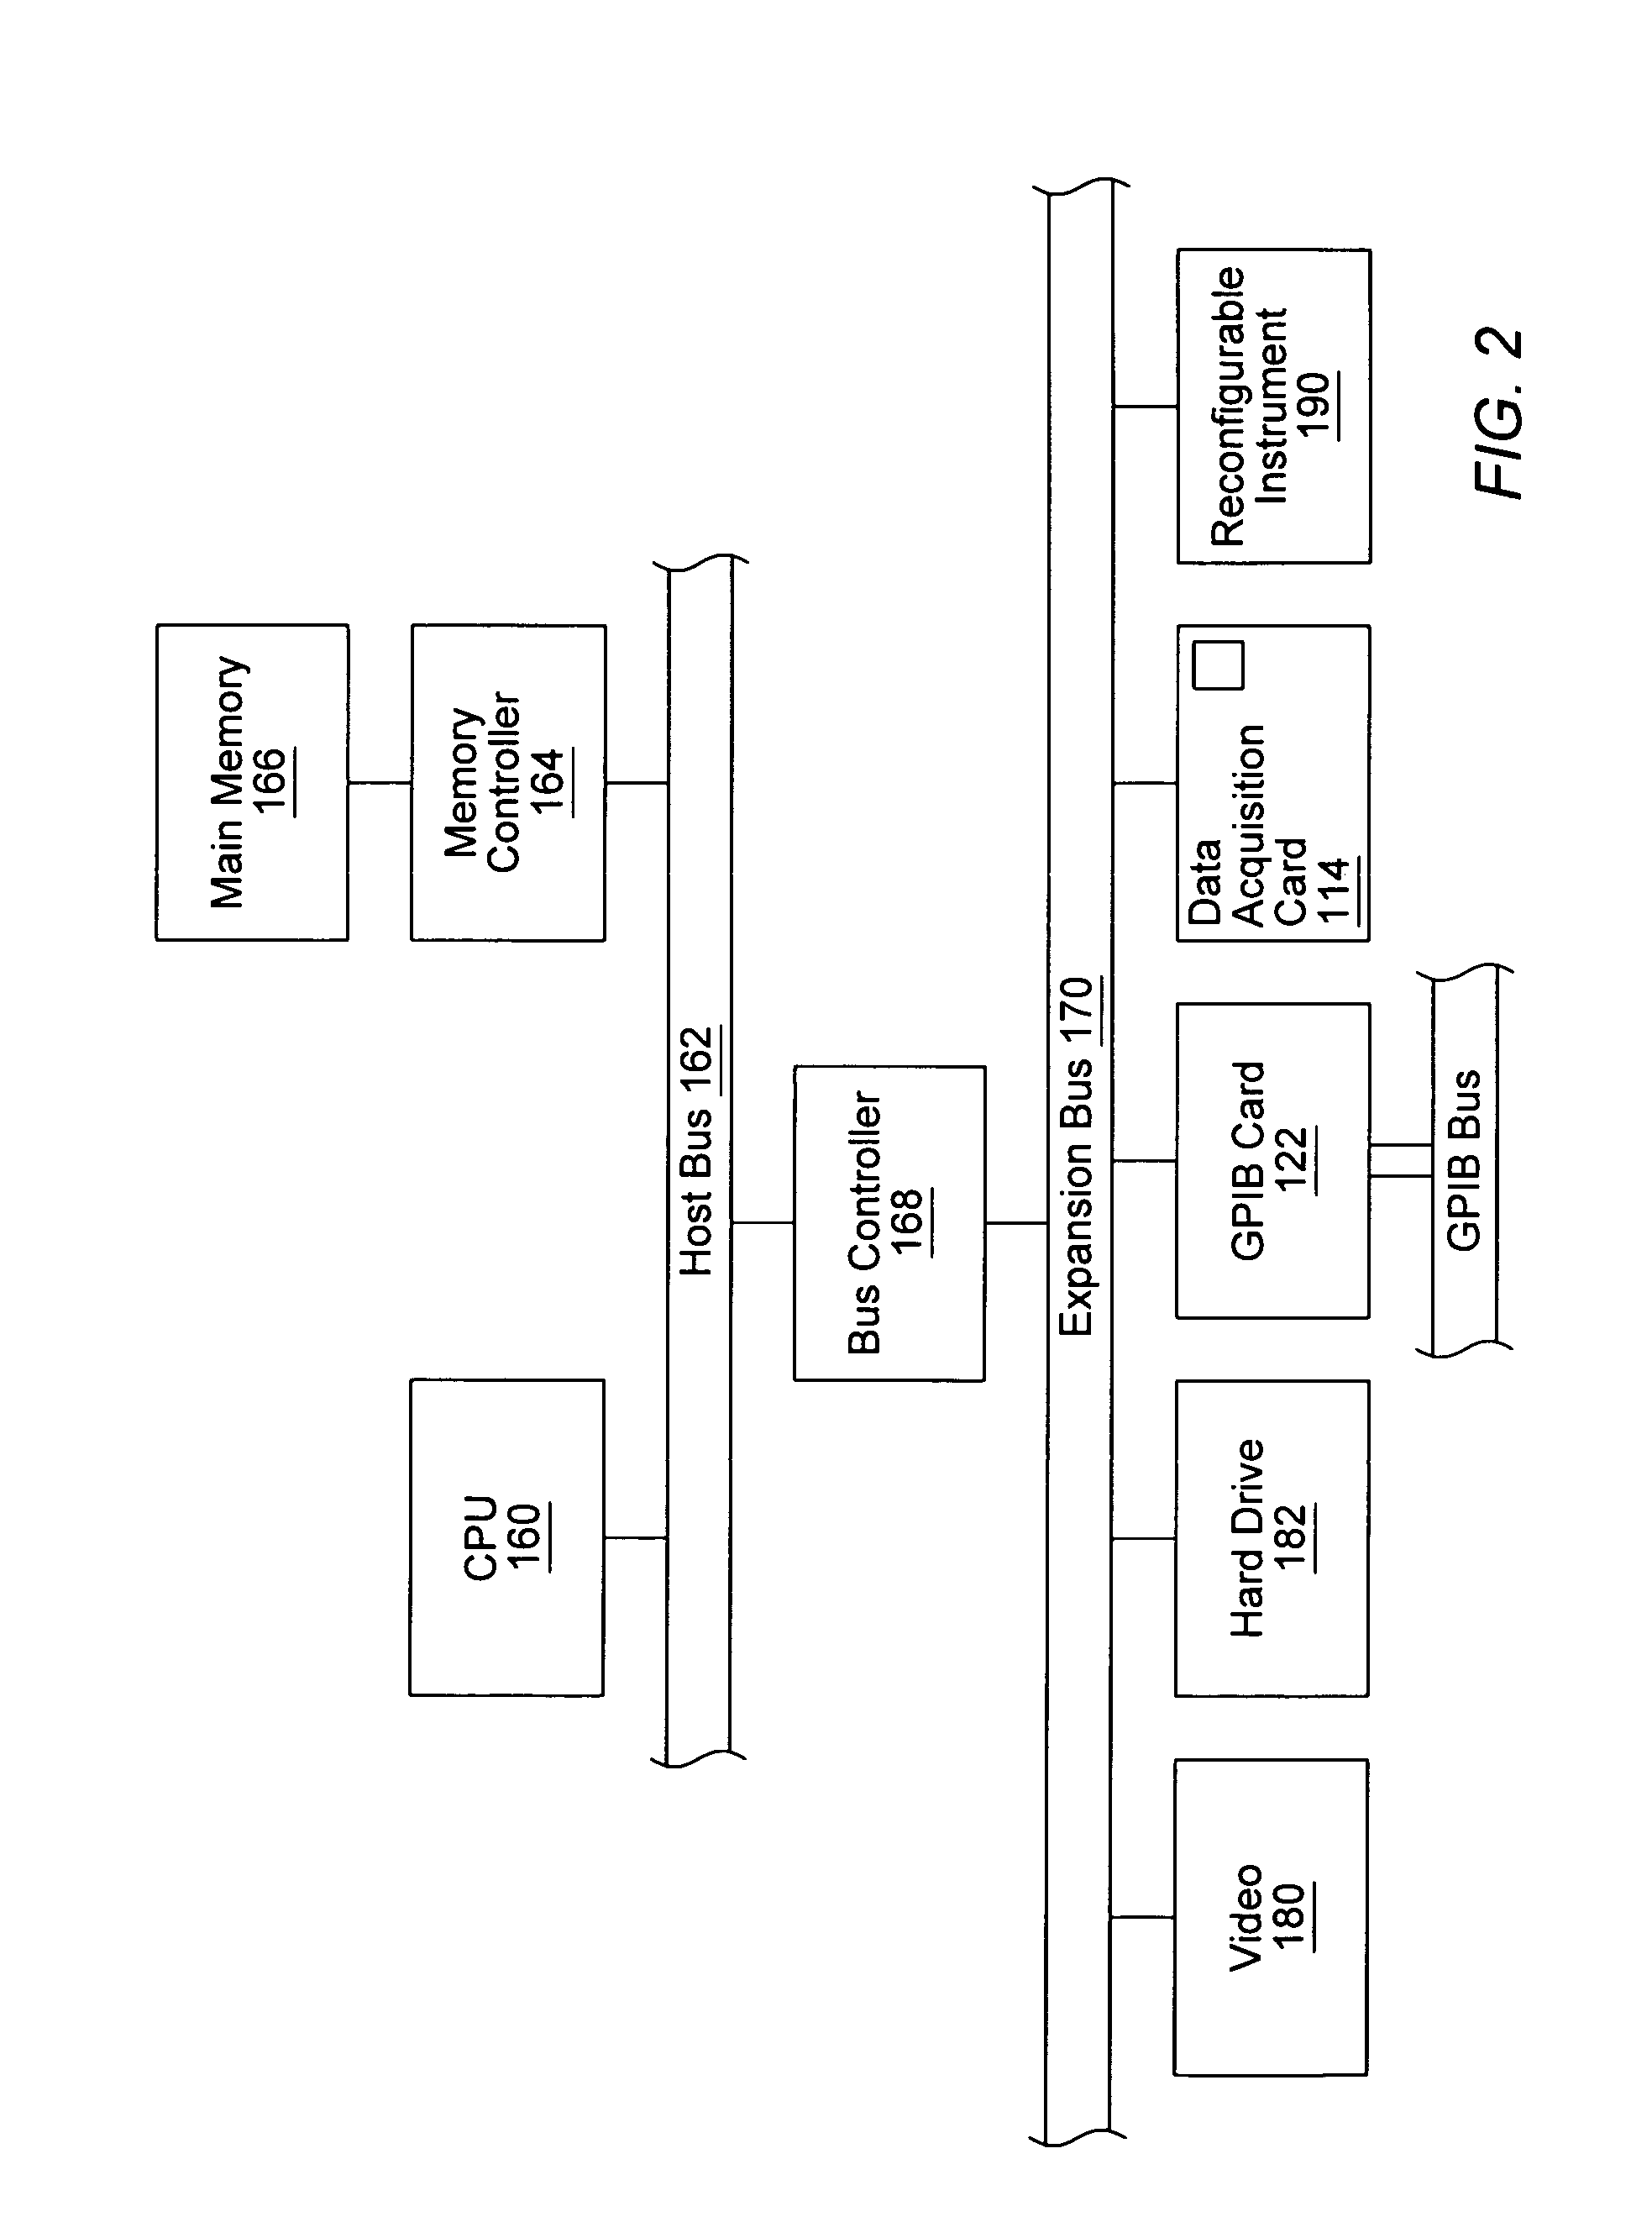 System and method for synchronizing execution of a test sequence